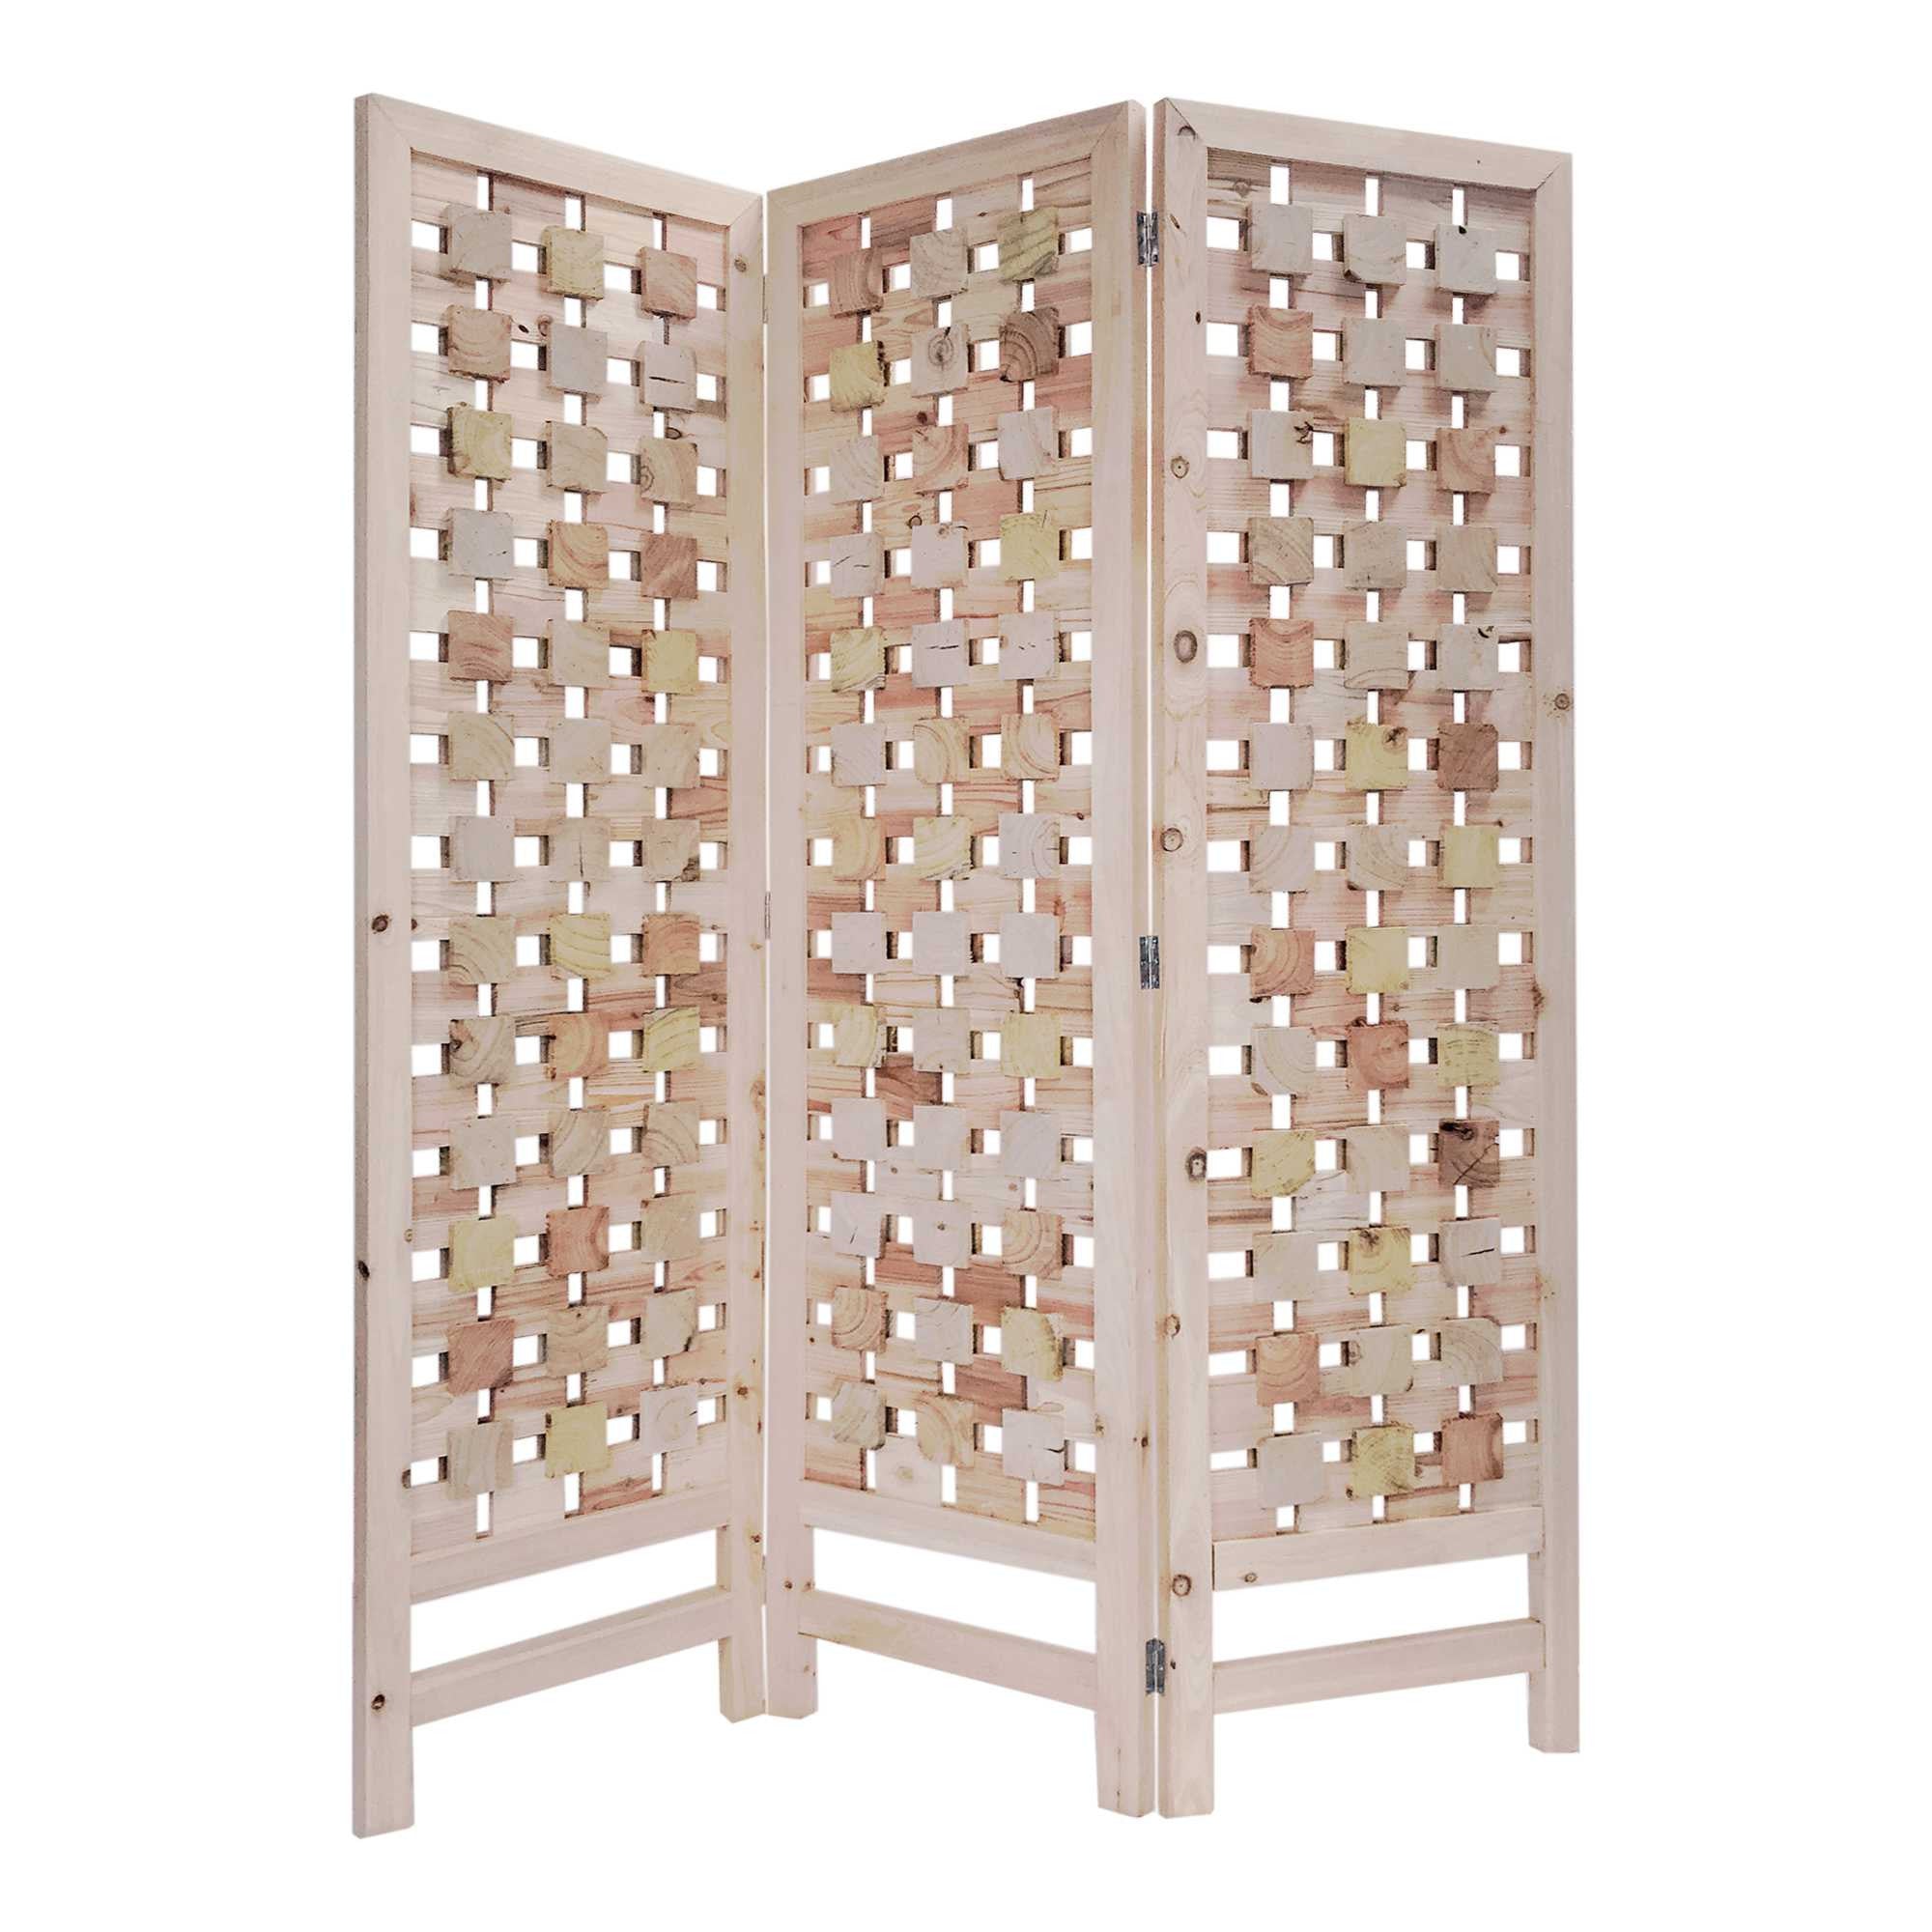 3 Panel Pink Room Divider With Cut Square Wood Design